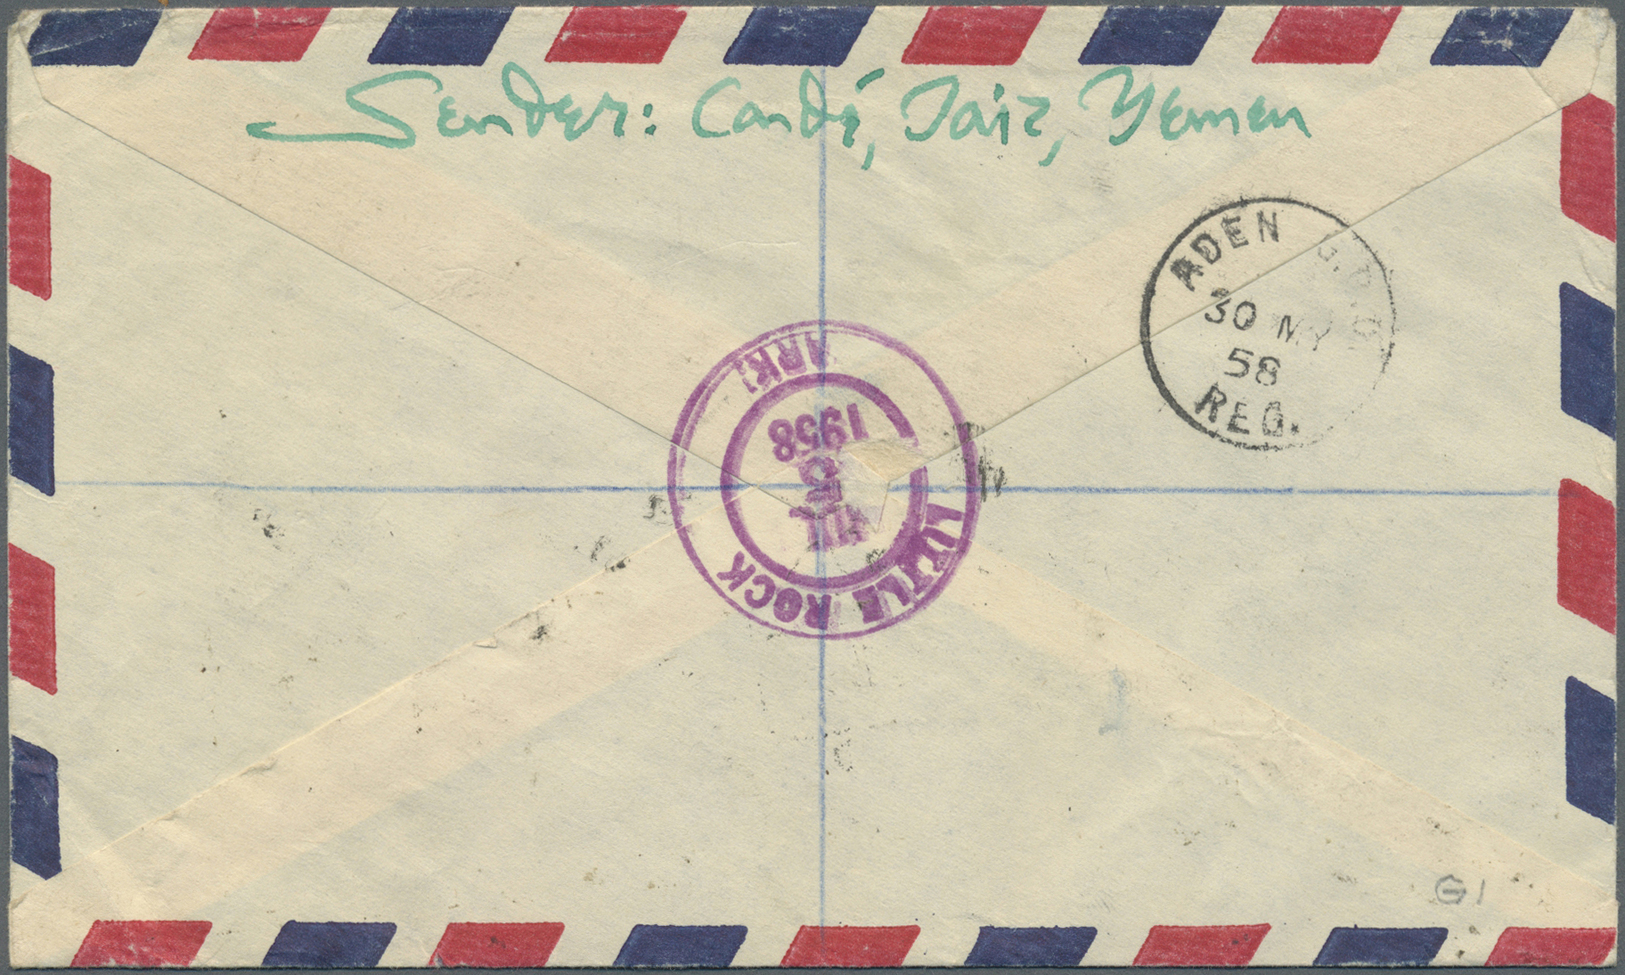 Br Jemen: 1957/1960, Lot Of Four Covers To USA Resp. Aden, Three Registered Mail, 4b. Arab Postal Union Plate Number, So - Yémen